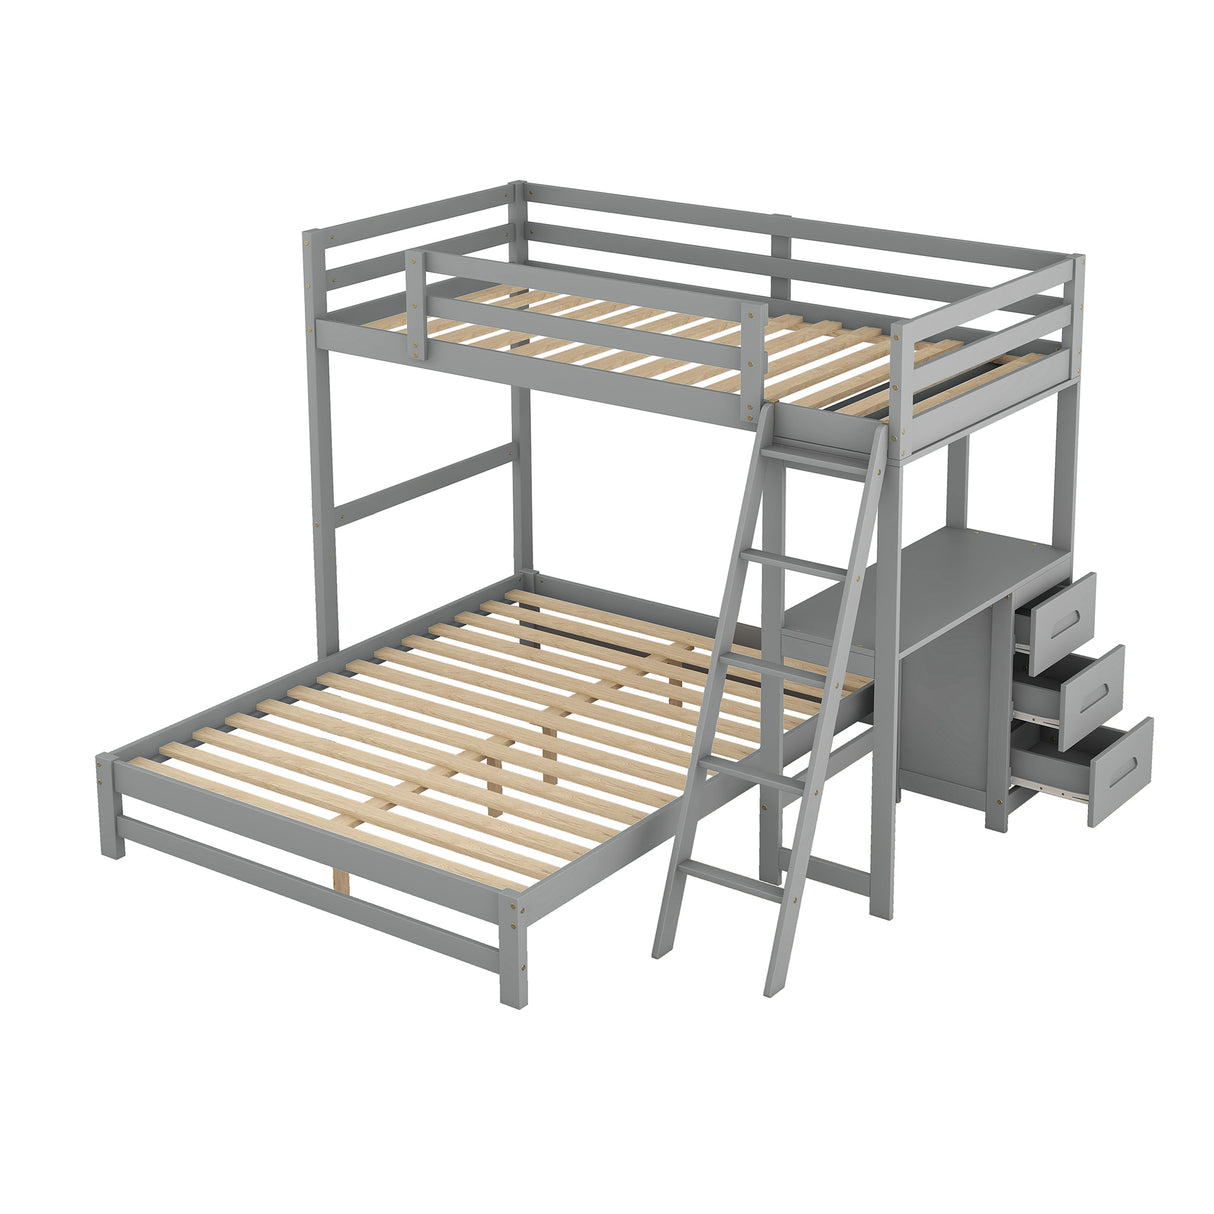 Twin over Full Bunk Bed with Built-in Desk and Three Drawers,Grey - Home Elegance USA